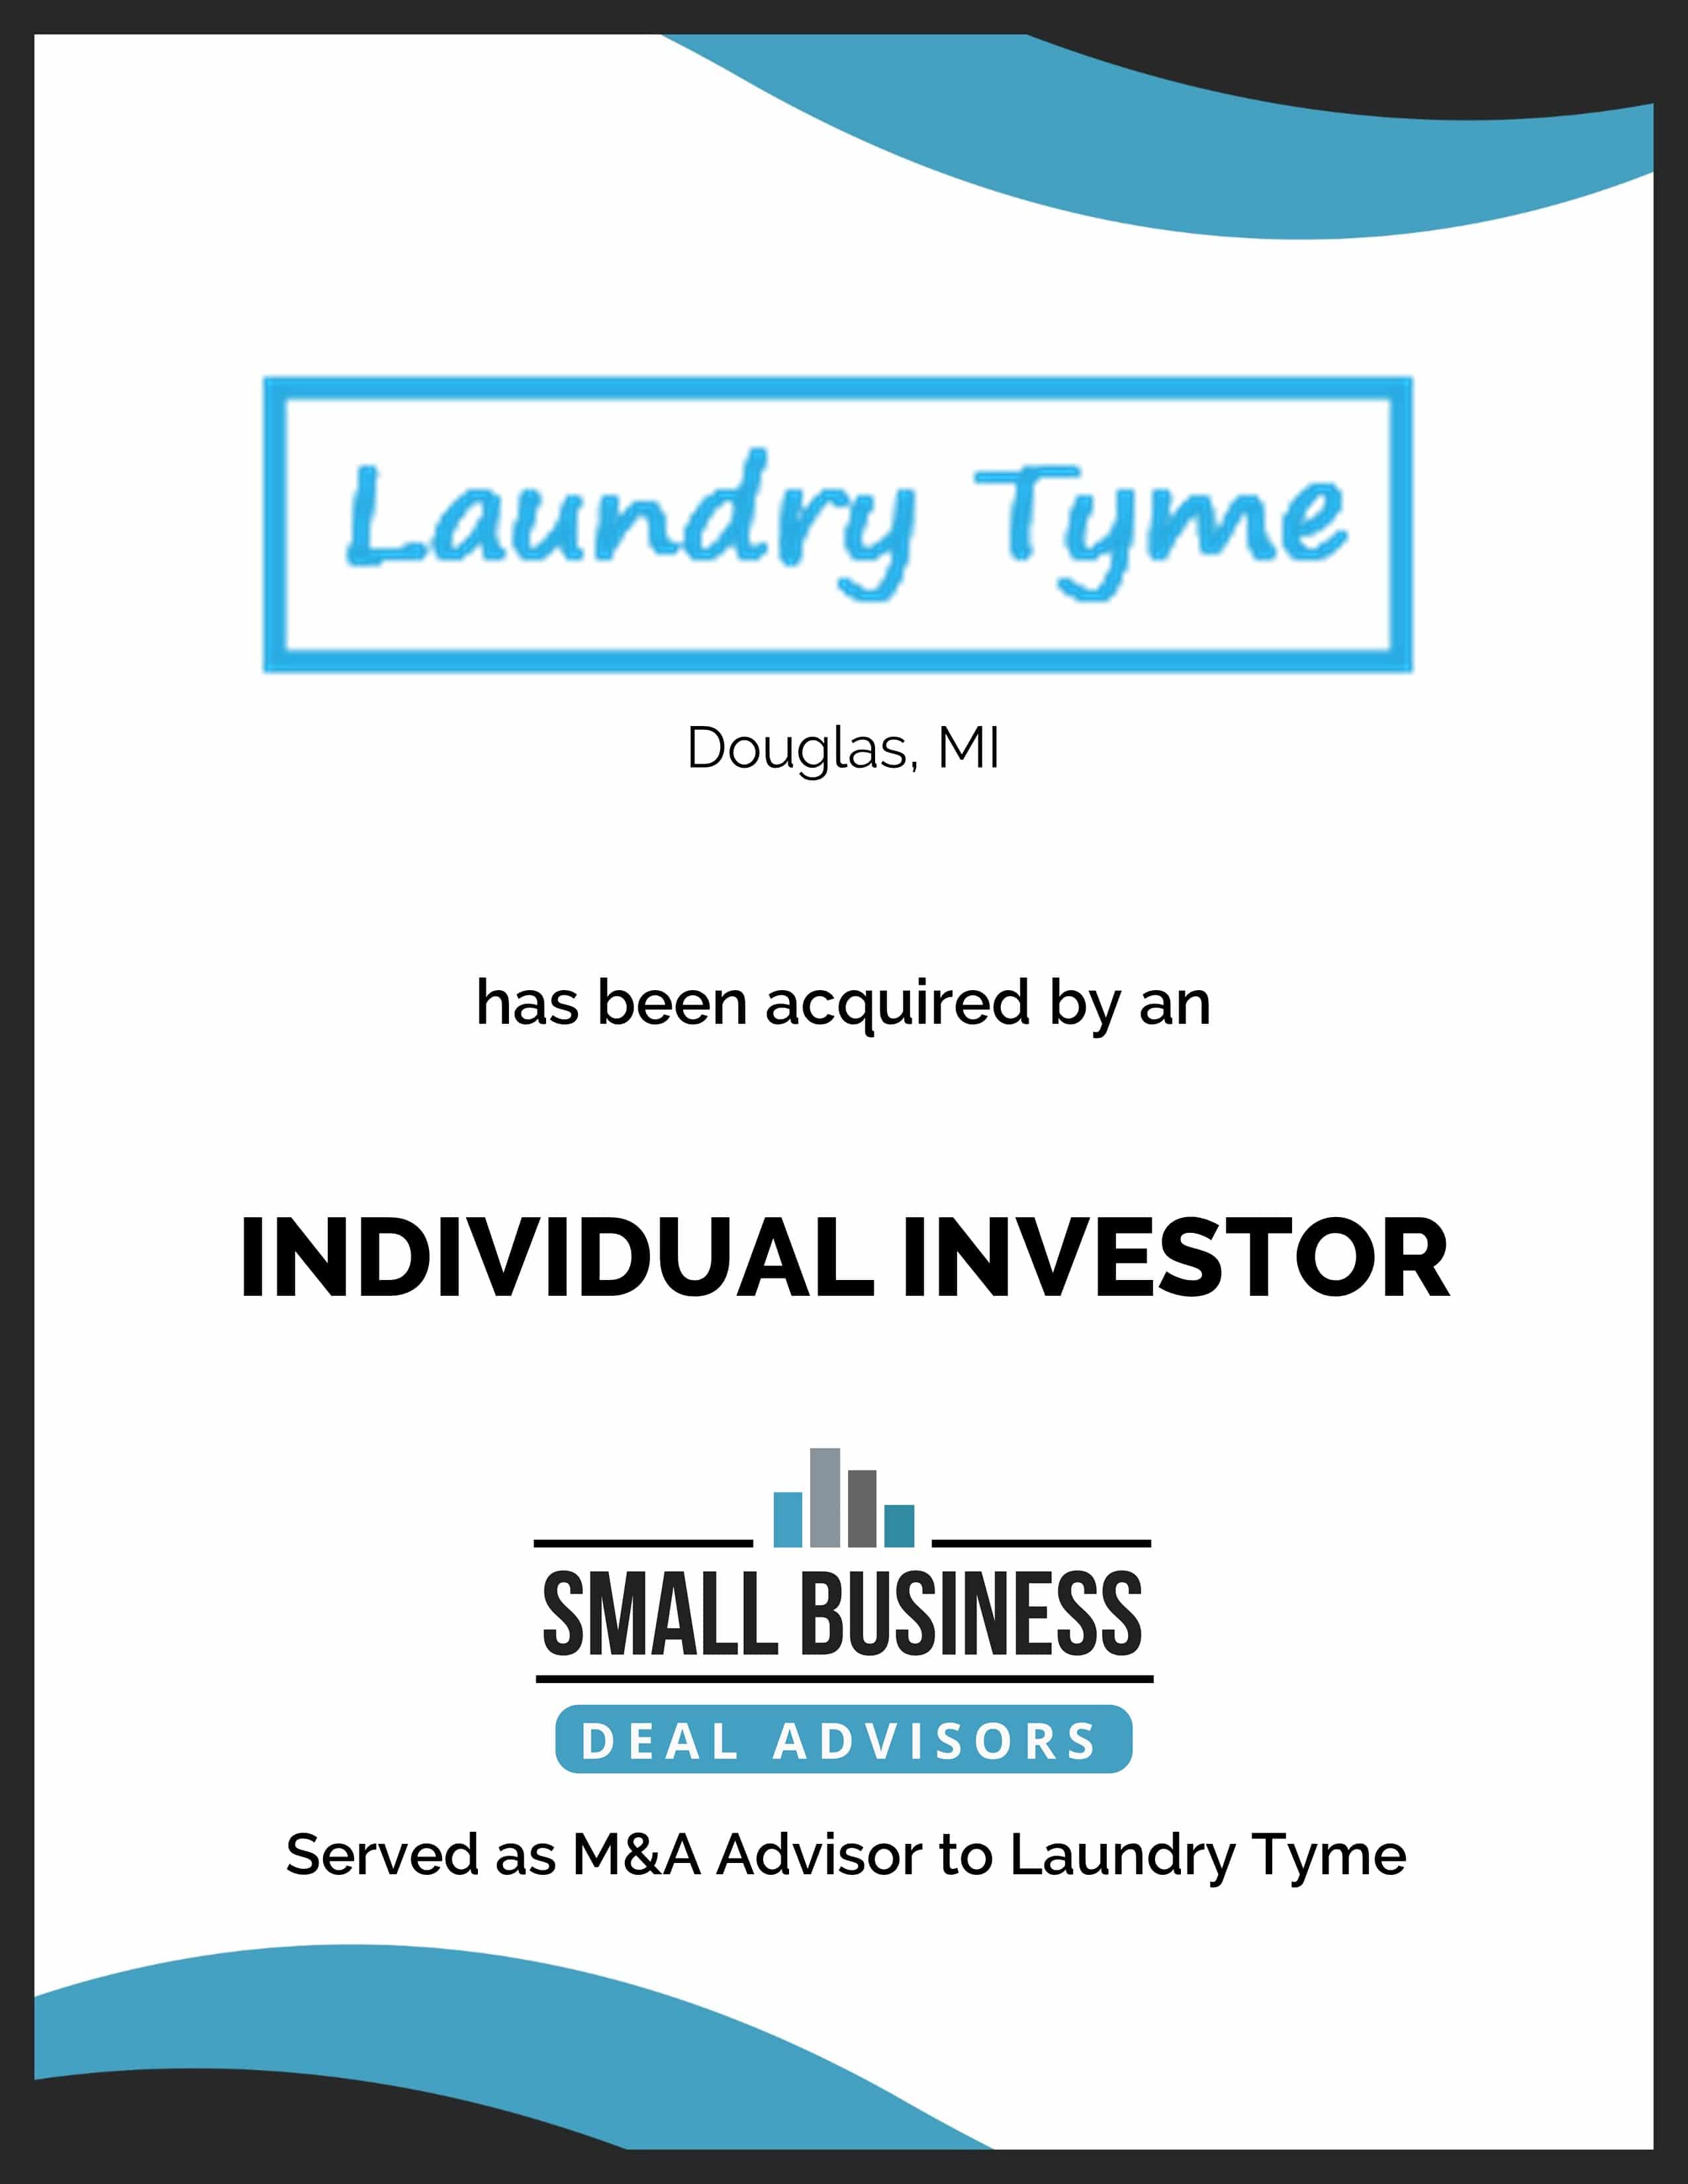 Laundry Tyme Sold to an Individual Investor